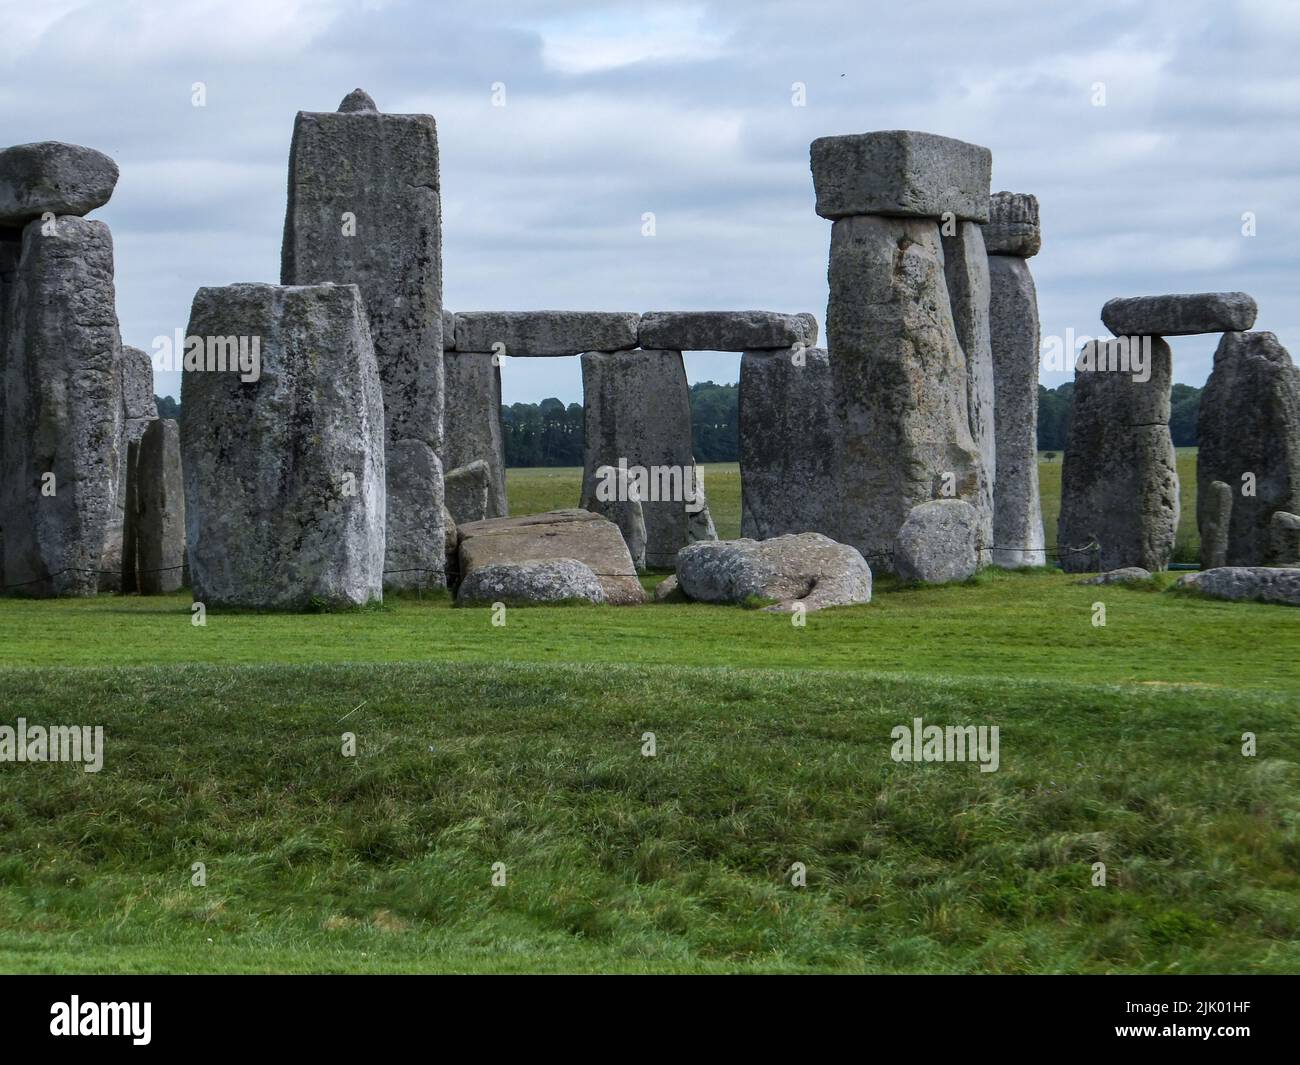 The ancient Stonehenge prehistoric monument near Amesbury in Wiltshire, England, UK is now a UNESCO World Heritage Site. Stock Photo